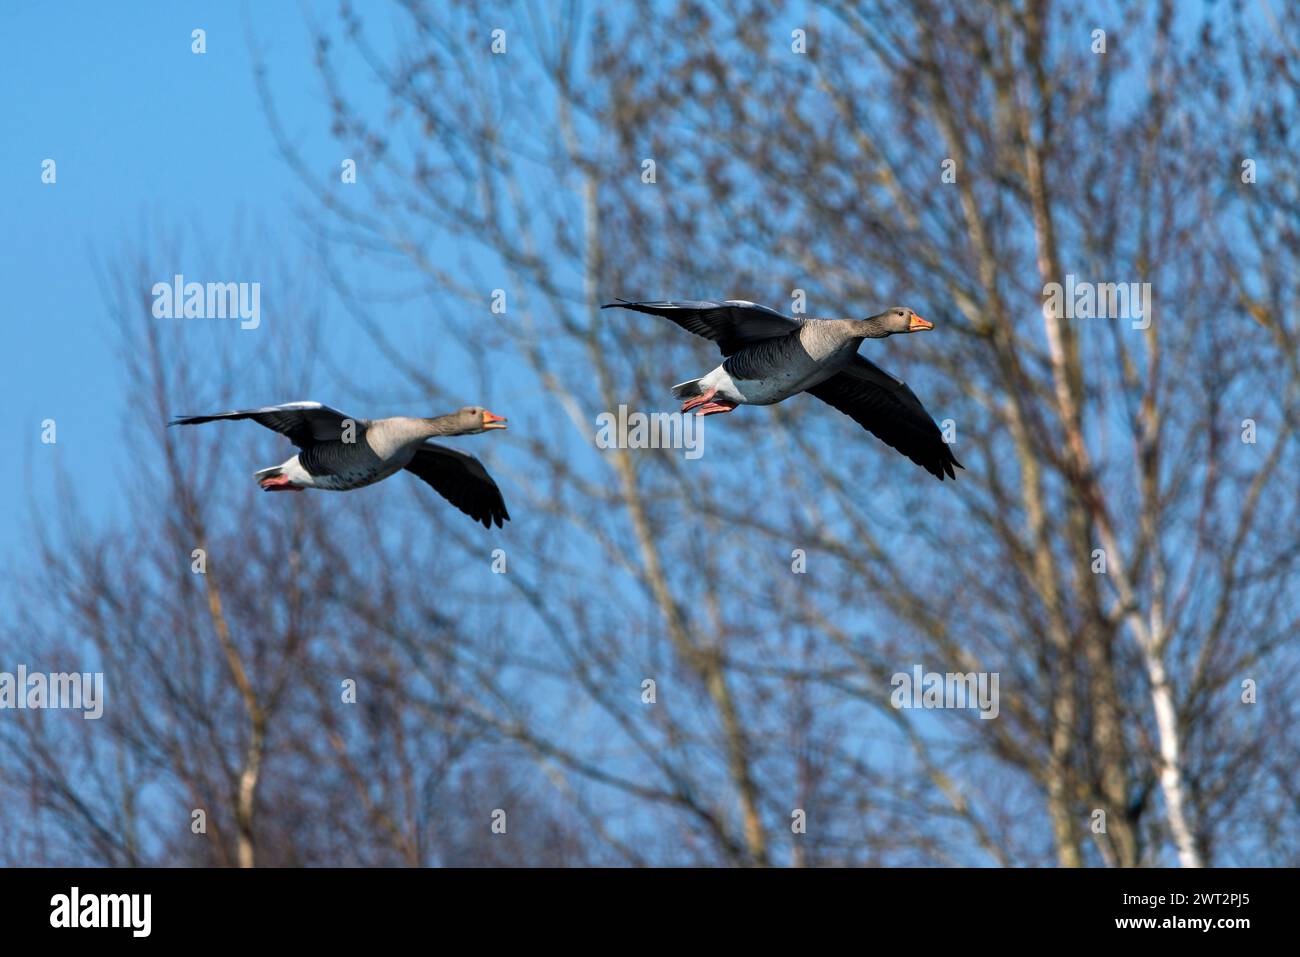 Greylag geese flying, selective focus Stock Photo